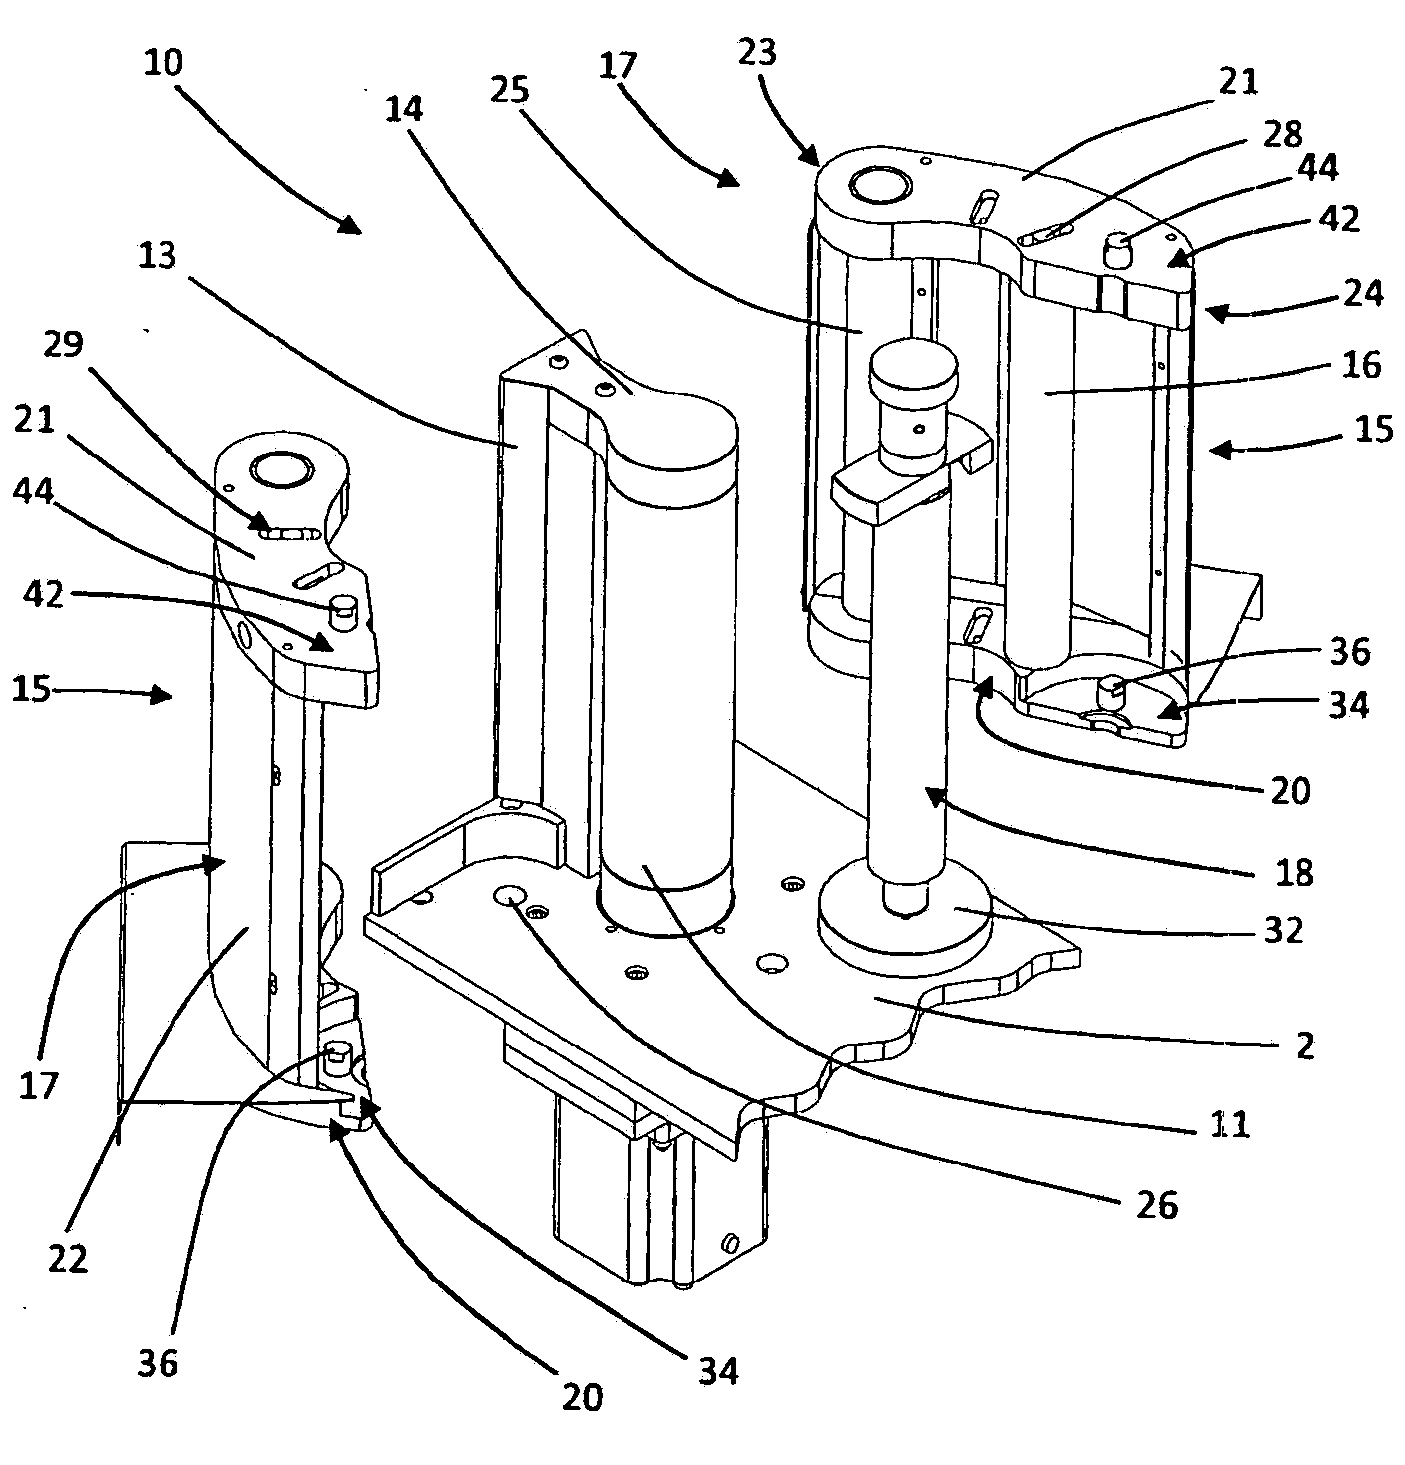 Device for feeding self-adhesive or "pressure sensitive" labels to a labelling machine